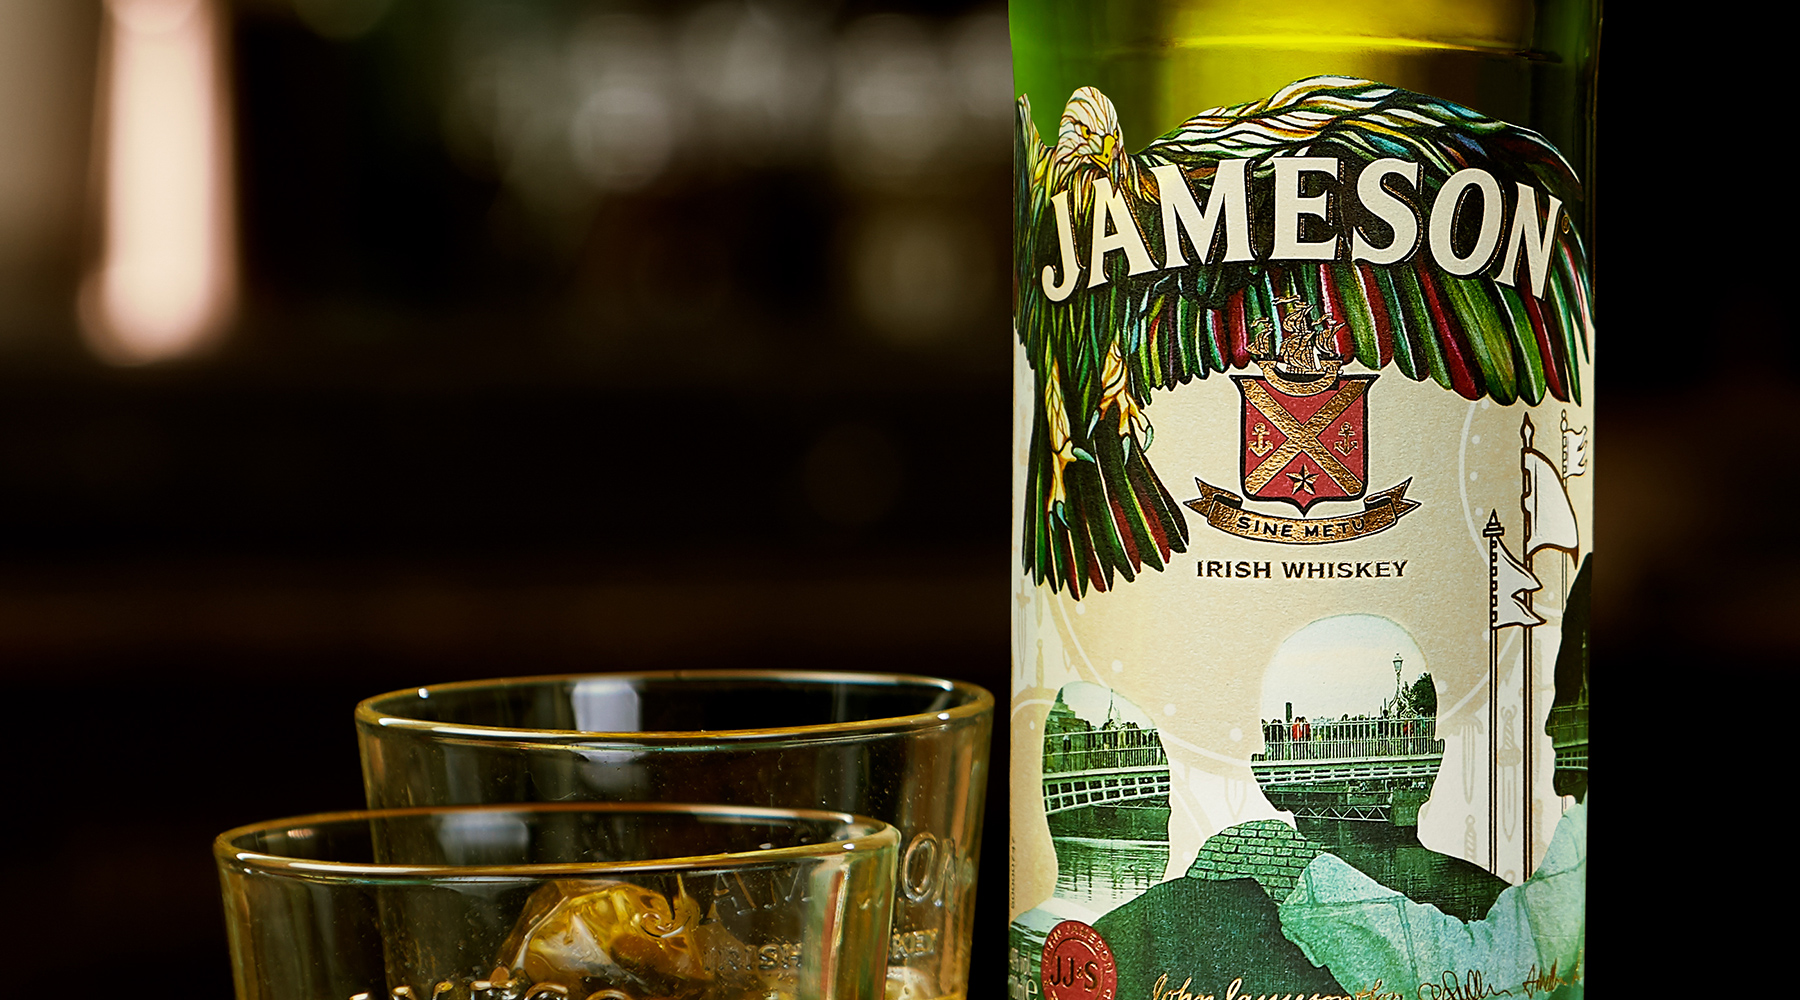 Pearlfisher’s Limited Ddition Jameson Bottle for St Patrick’s Day